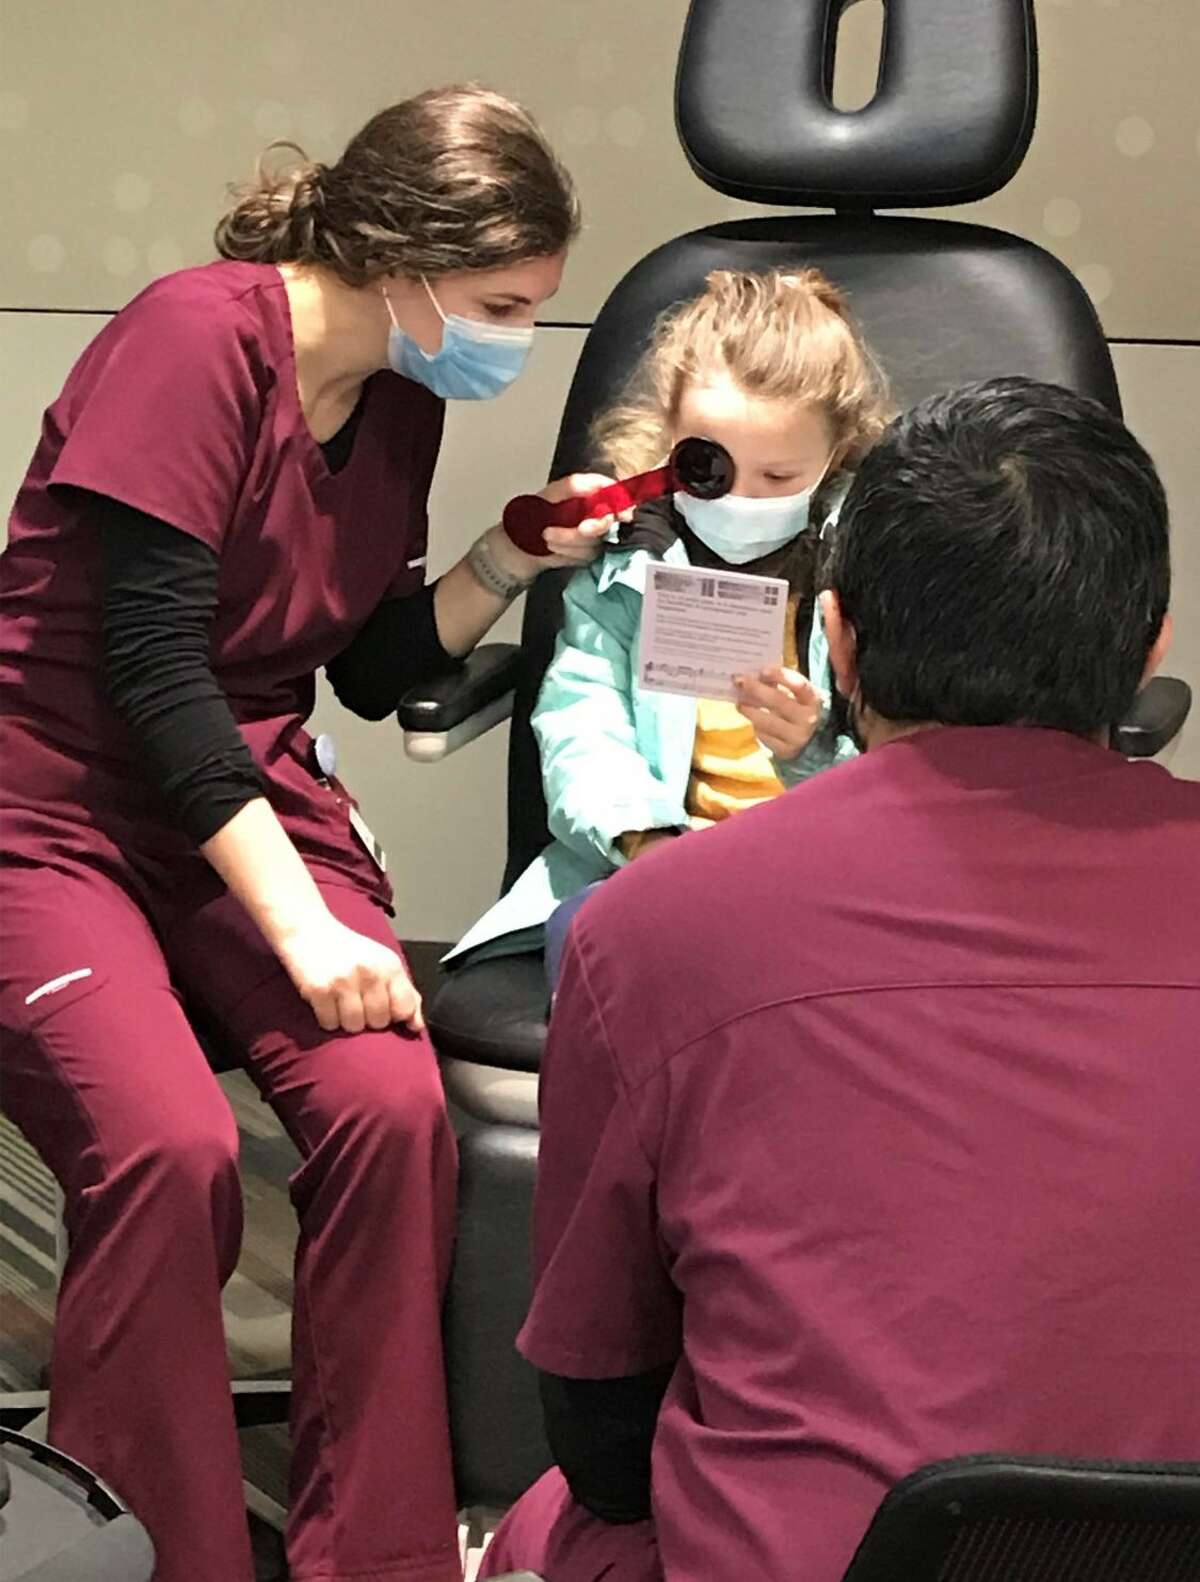 On Tuesday, Nov, 30, Ferris State University hosted the Michigan College of Optometry's Students in Need of Eyecare program which provides free exams and glasses for kids in the area. 